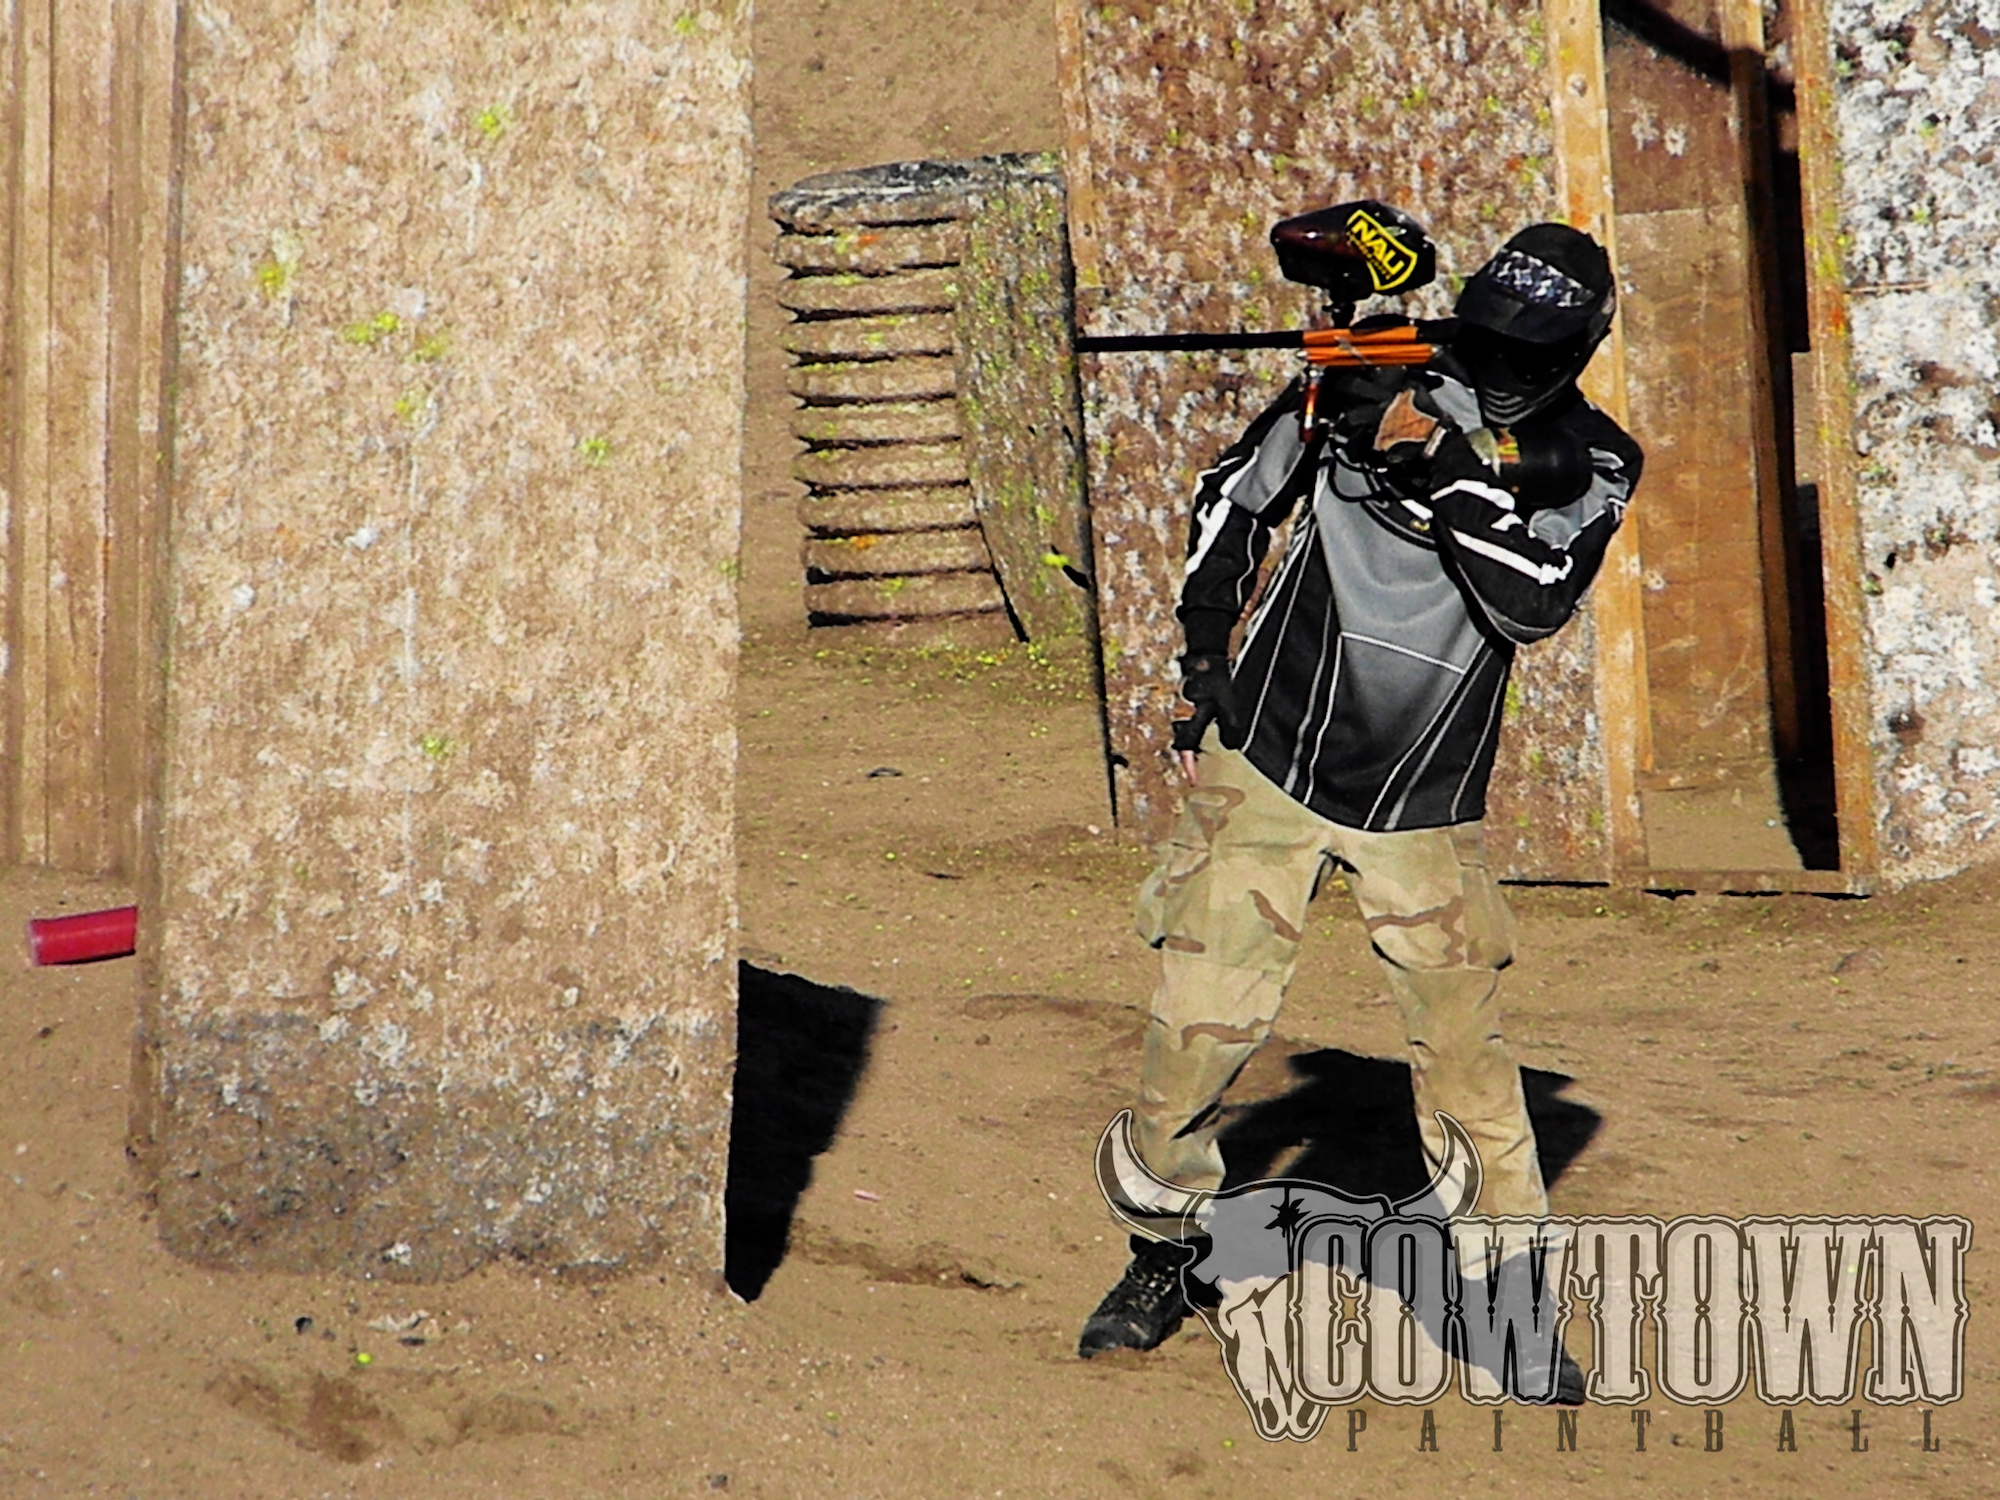 Cowtown paintball park